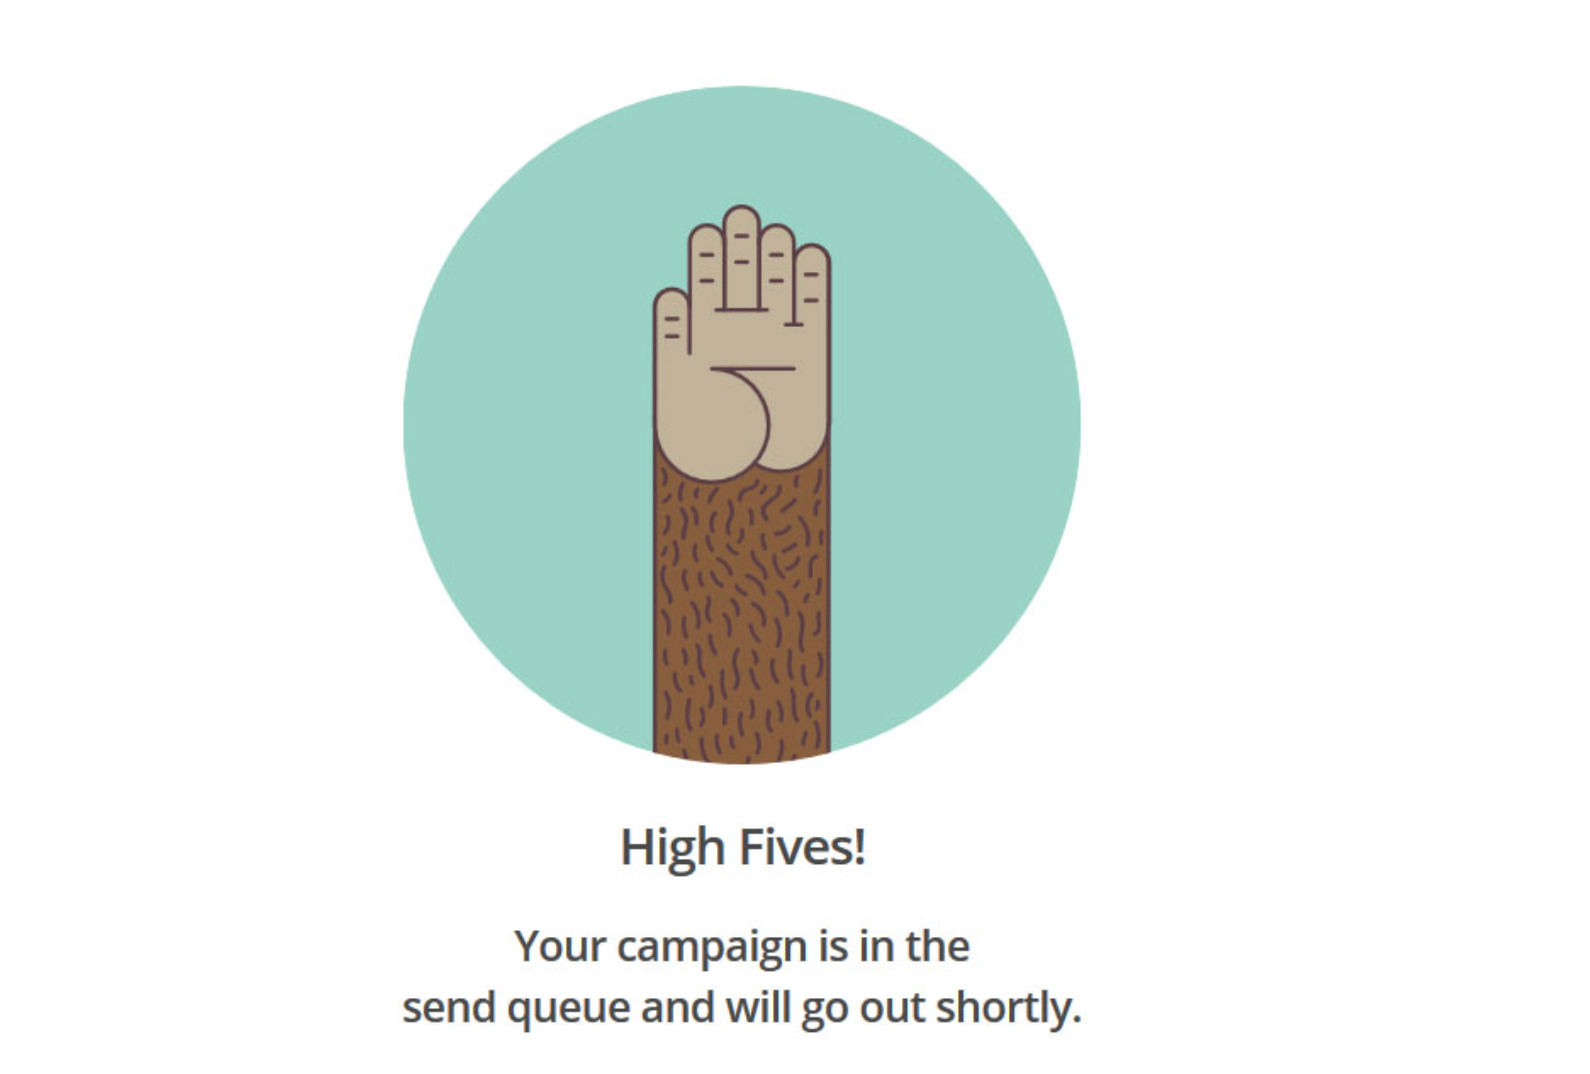 MailChimp’s success message takes into account the user’s emotional state after sending/queuing up a newsletter.